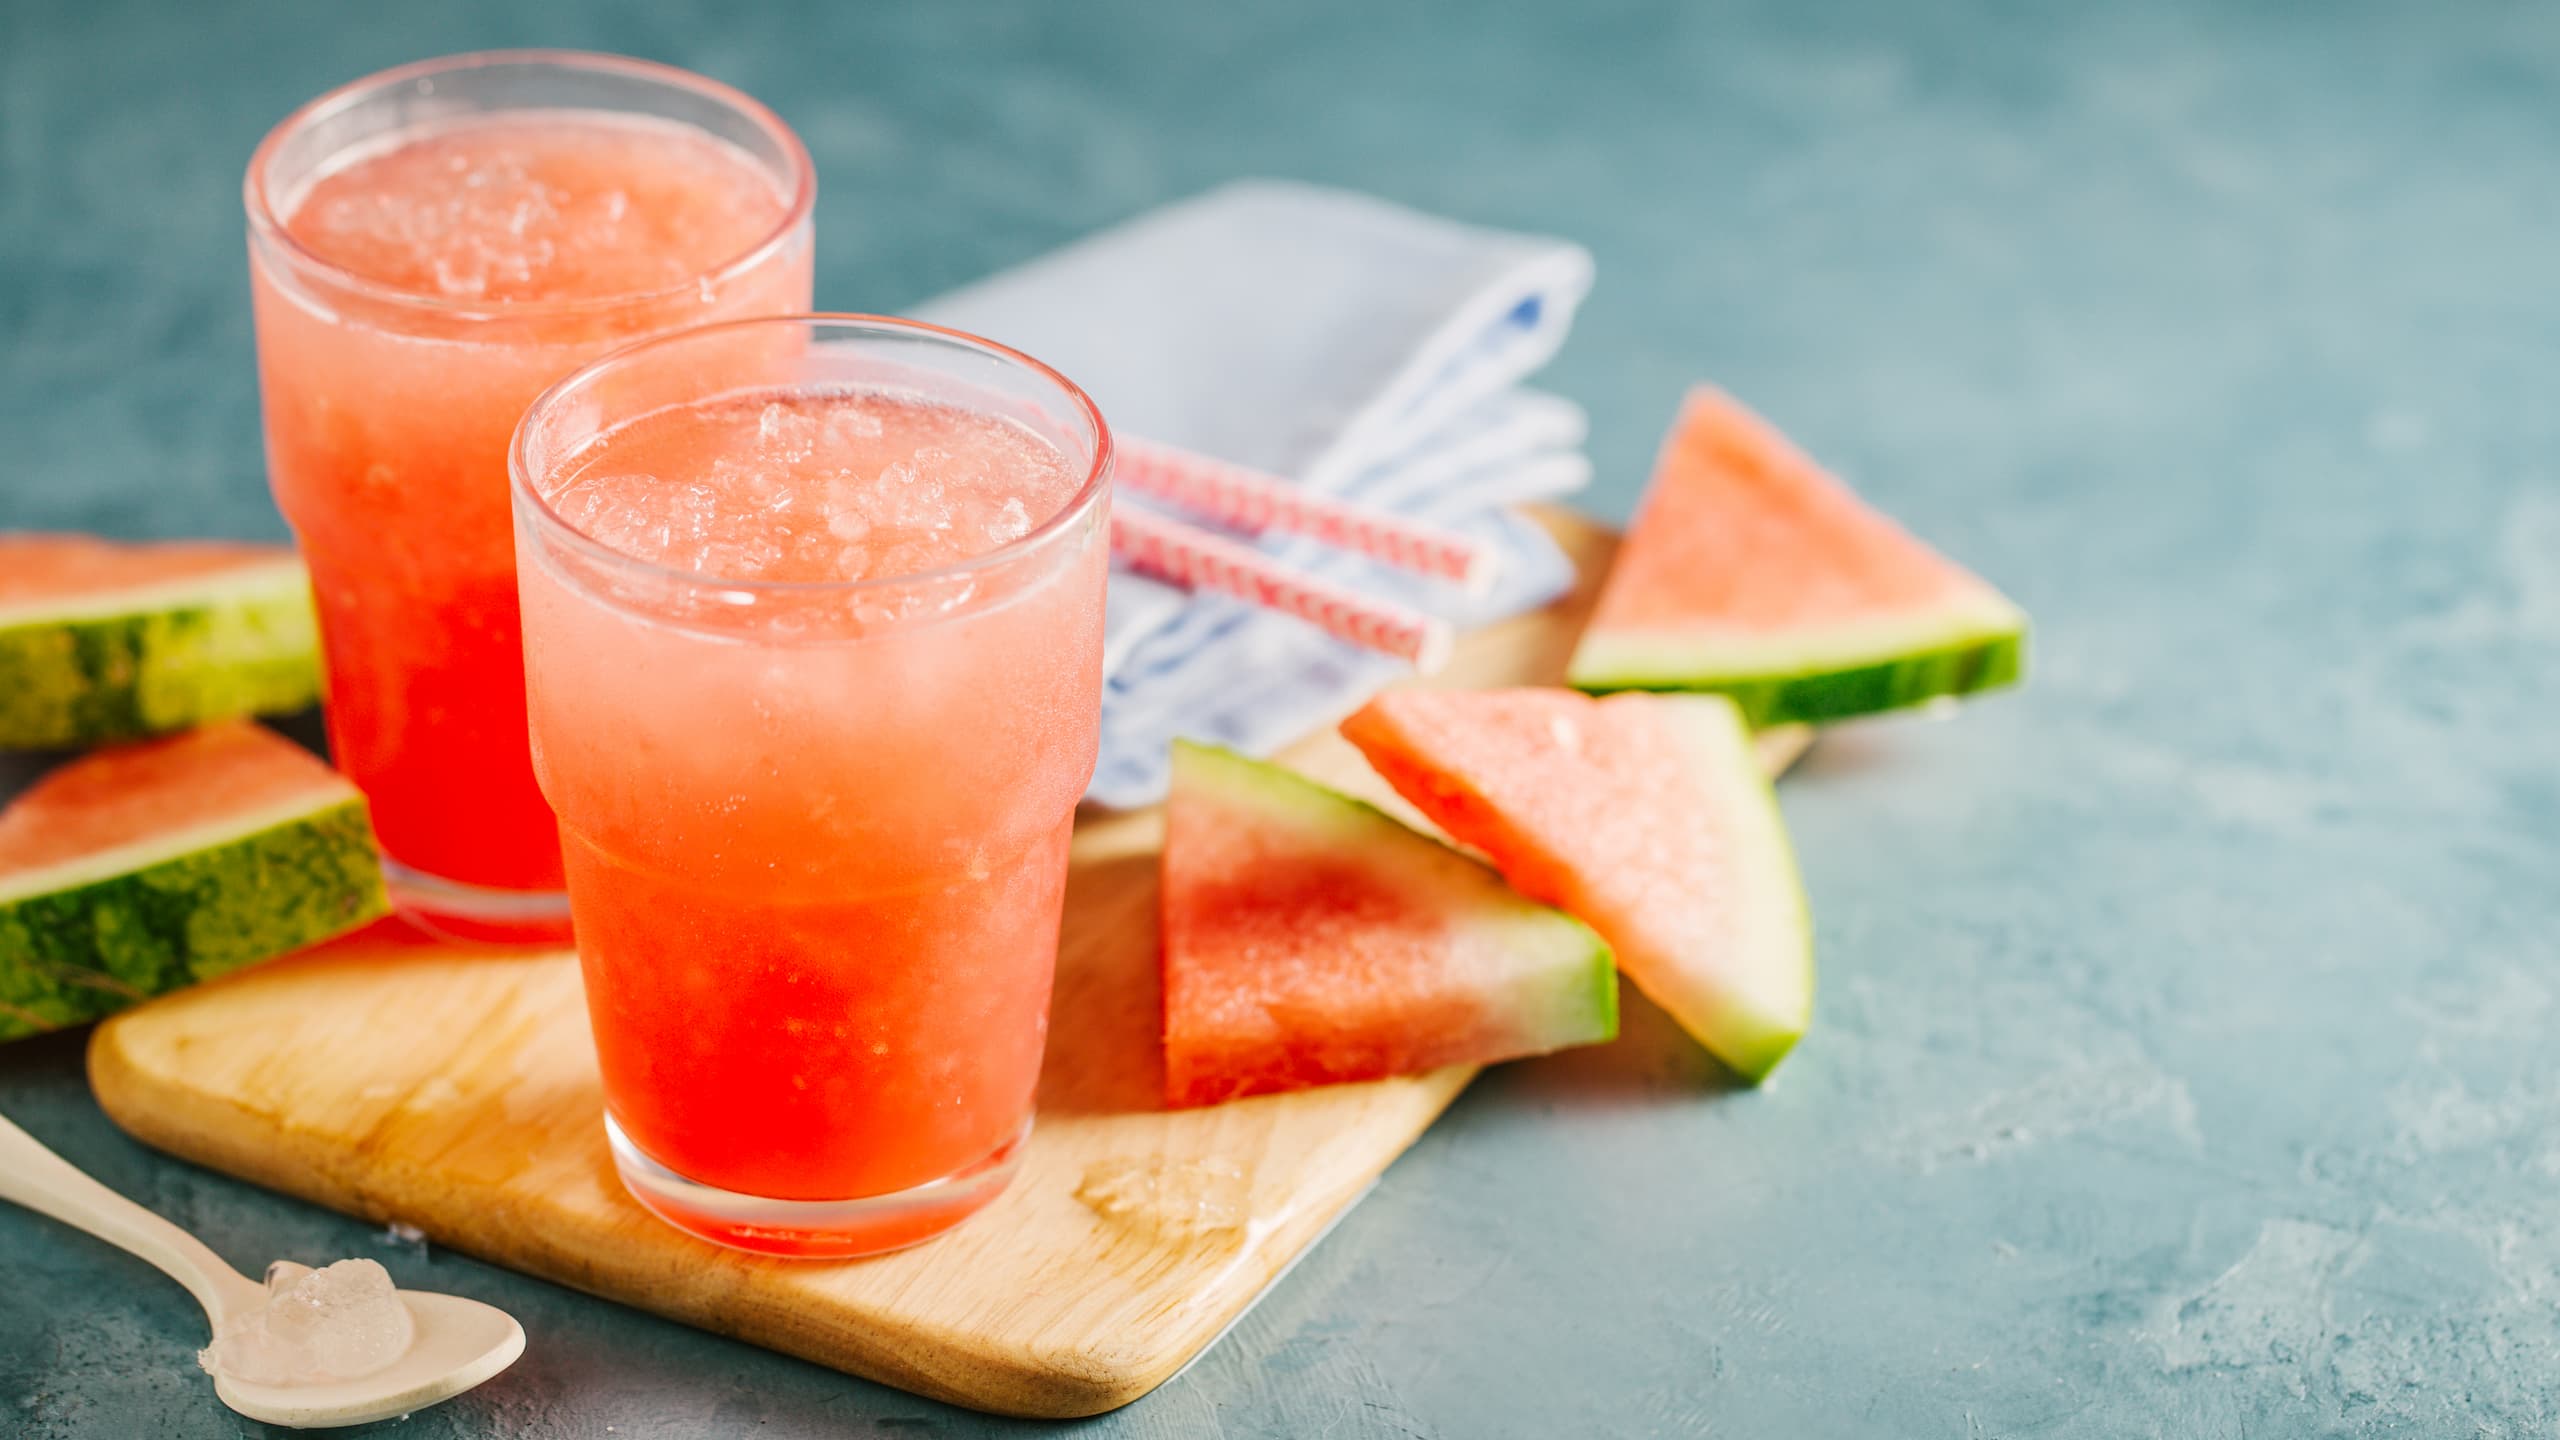 Refreshing Johnny Vegas shot recipe with Watermelon slices